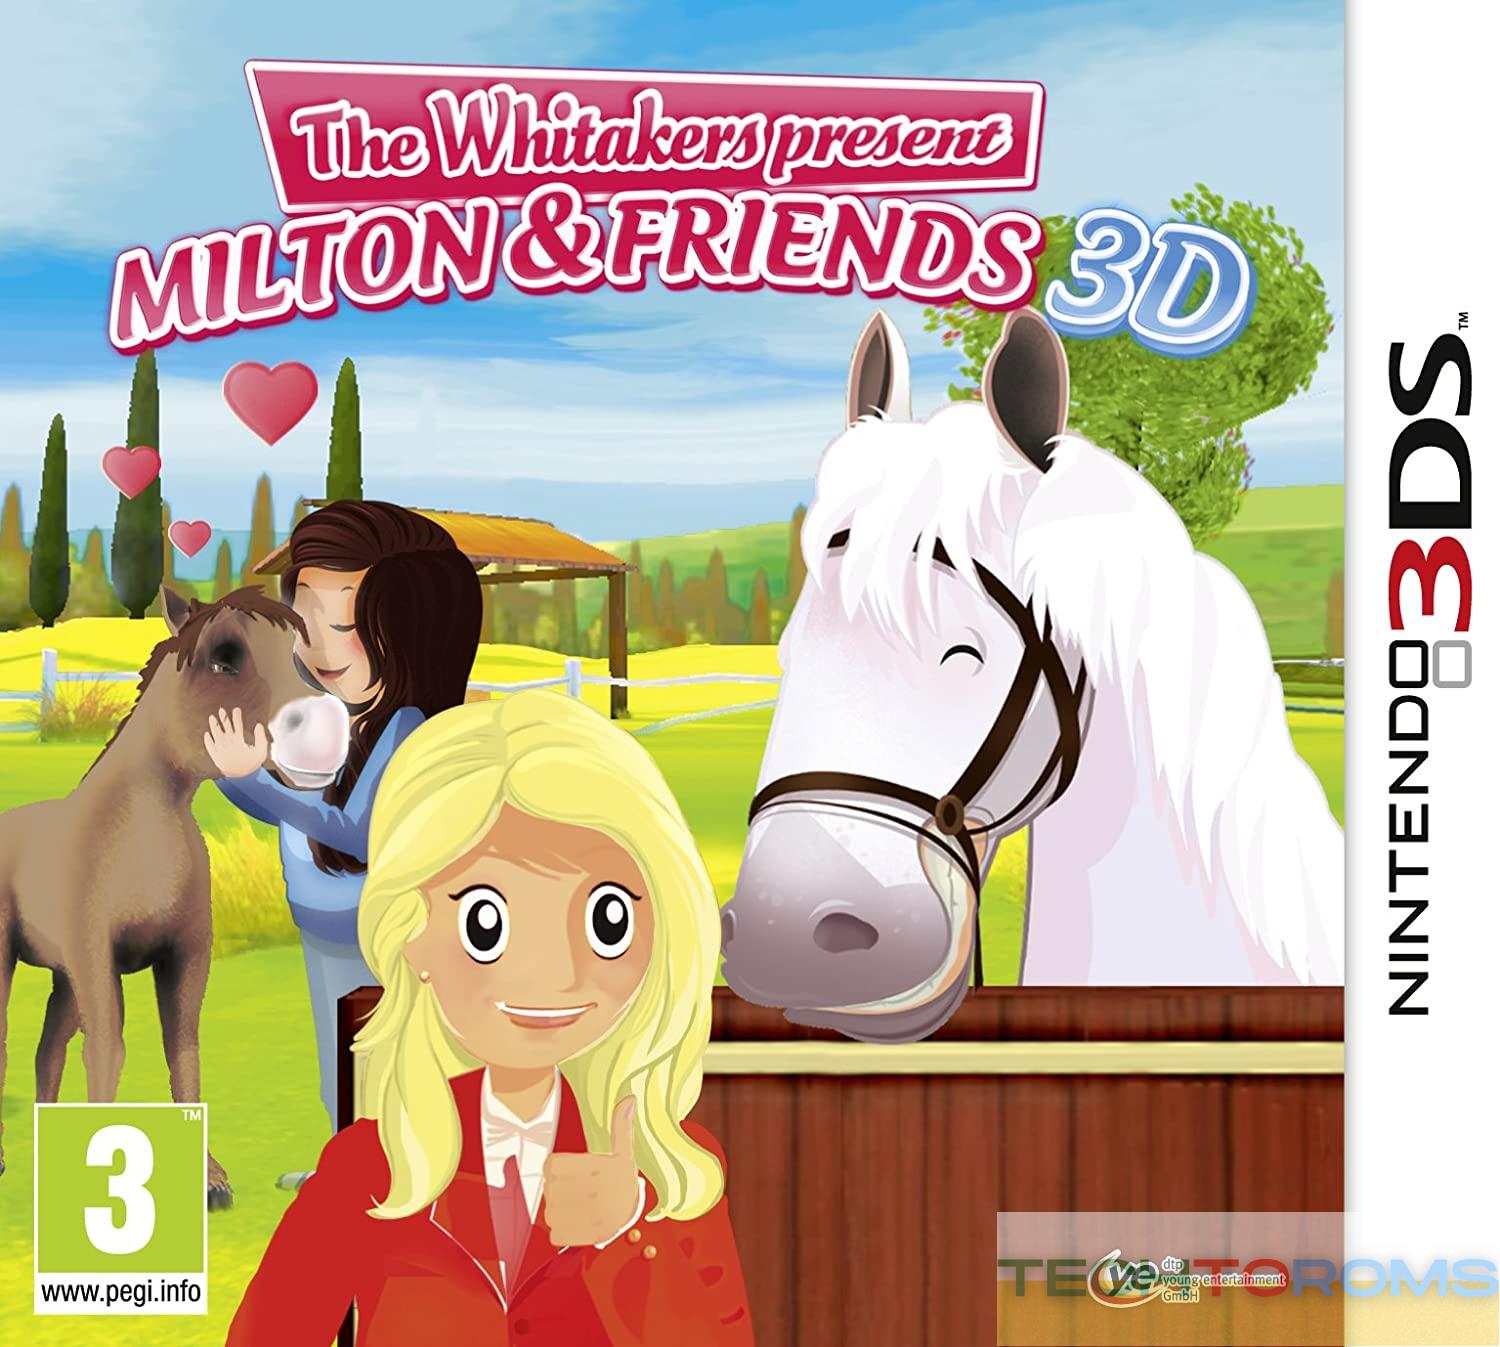 The Whitakers present: Milton & Friends 3D